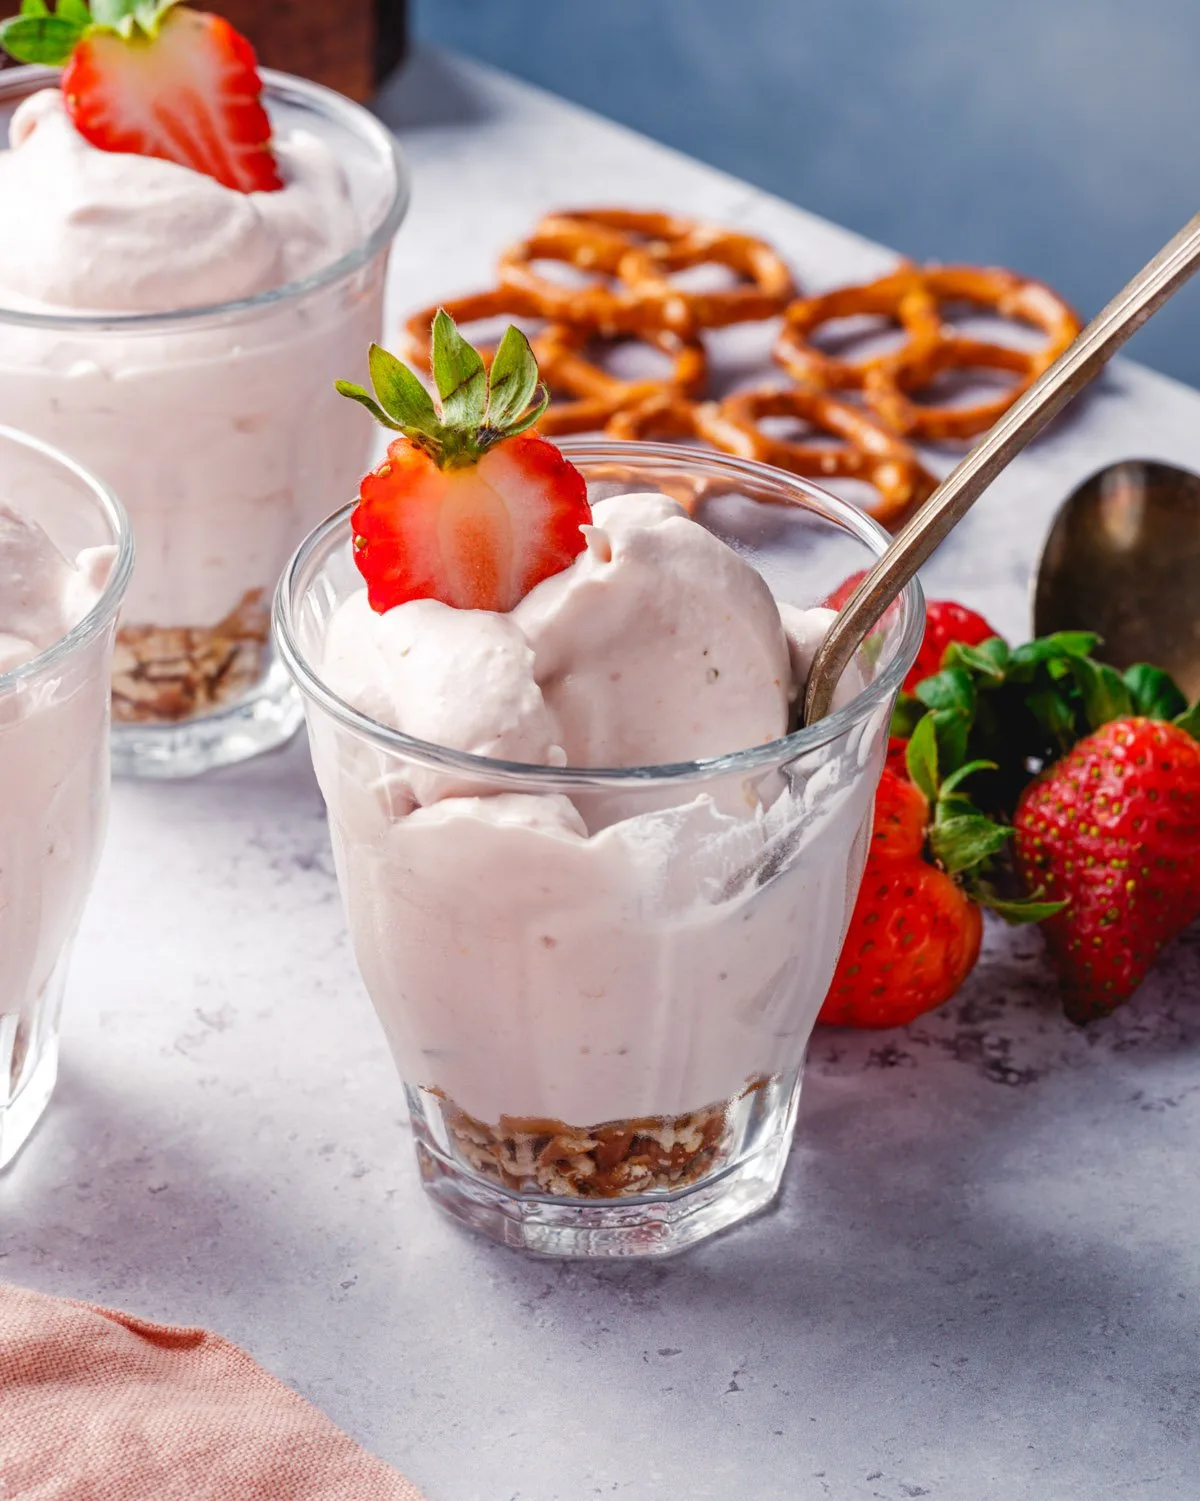 Strawberry Mousse (3 Ingredients!)